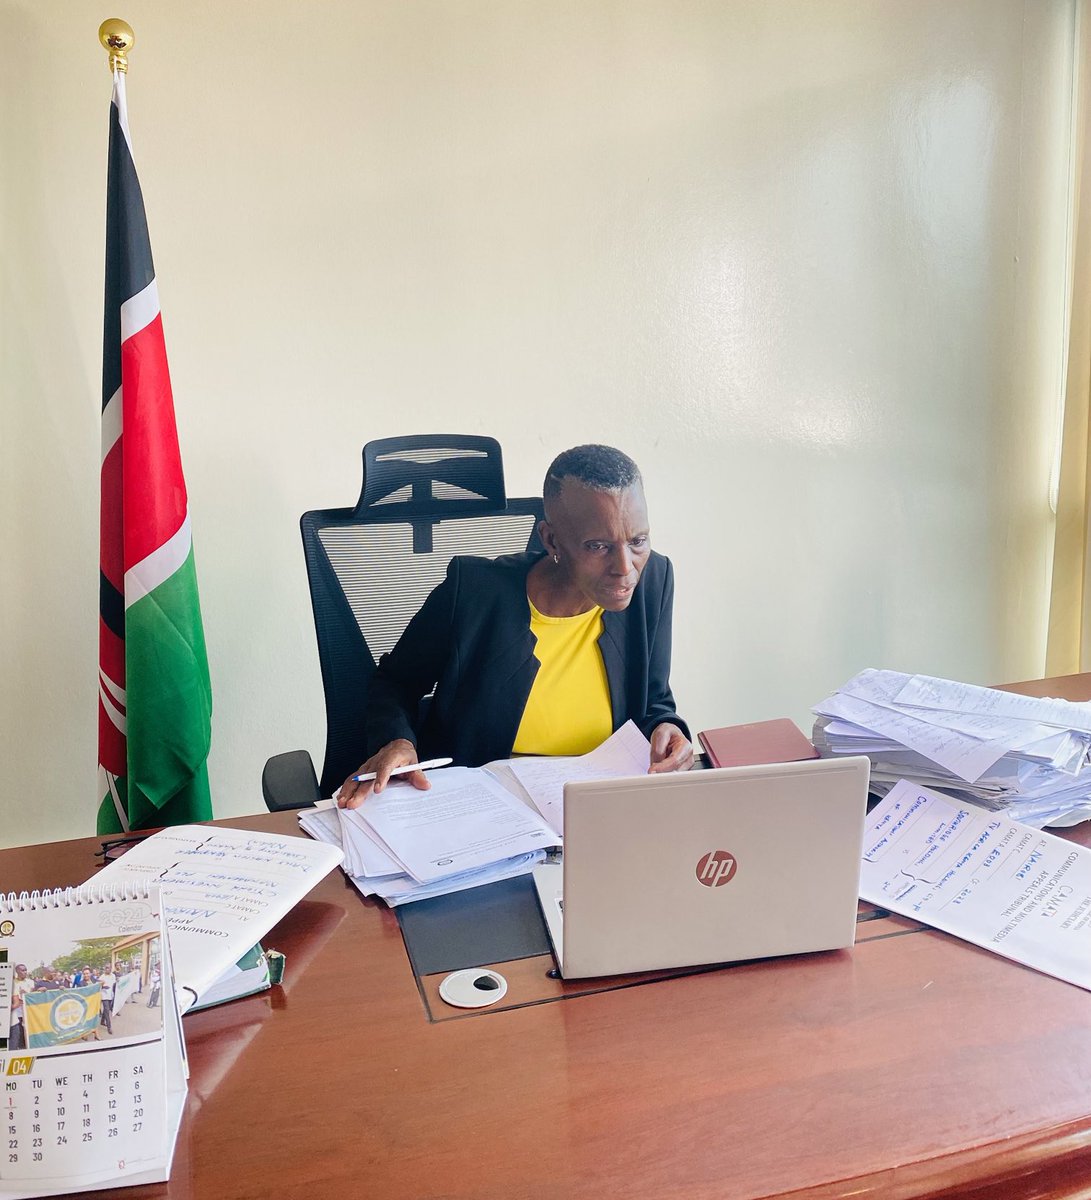 The Communication and Multimedia Appeals Tribunal under Section 102 of the Kenya Information and communication Act No. 2 of 1998, Laws of Kenya led by Hon. Rosemary W. Kuria chairperson having a court session after the swearing in of the new members.